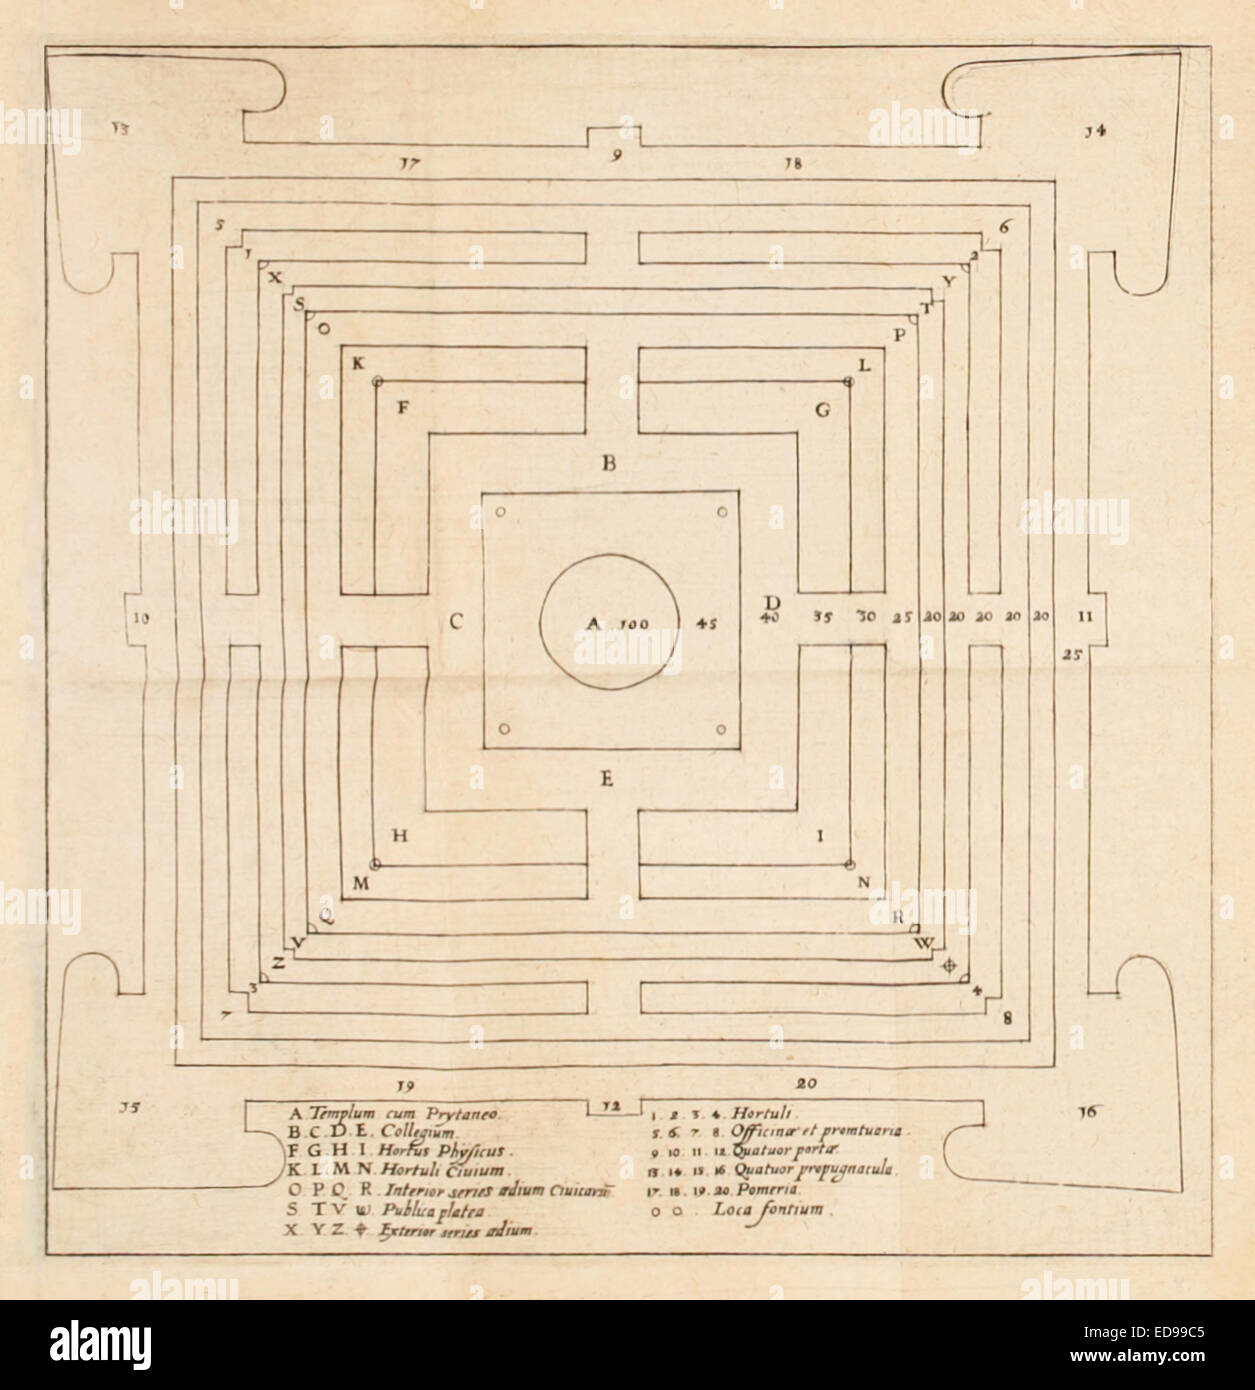 Plan of Christianopolis from 'Reipublicae Christianopolitanae descriptio' by Johannes Valentinus Andreae (1586-1654) published in 1619. See description for more information. Stock Photo